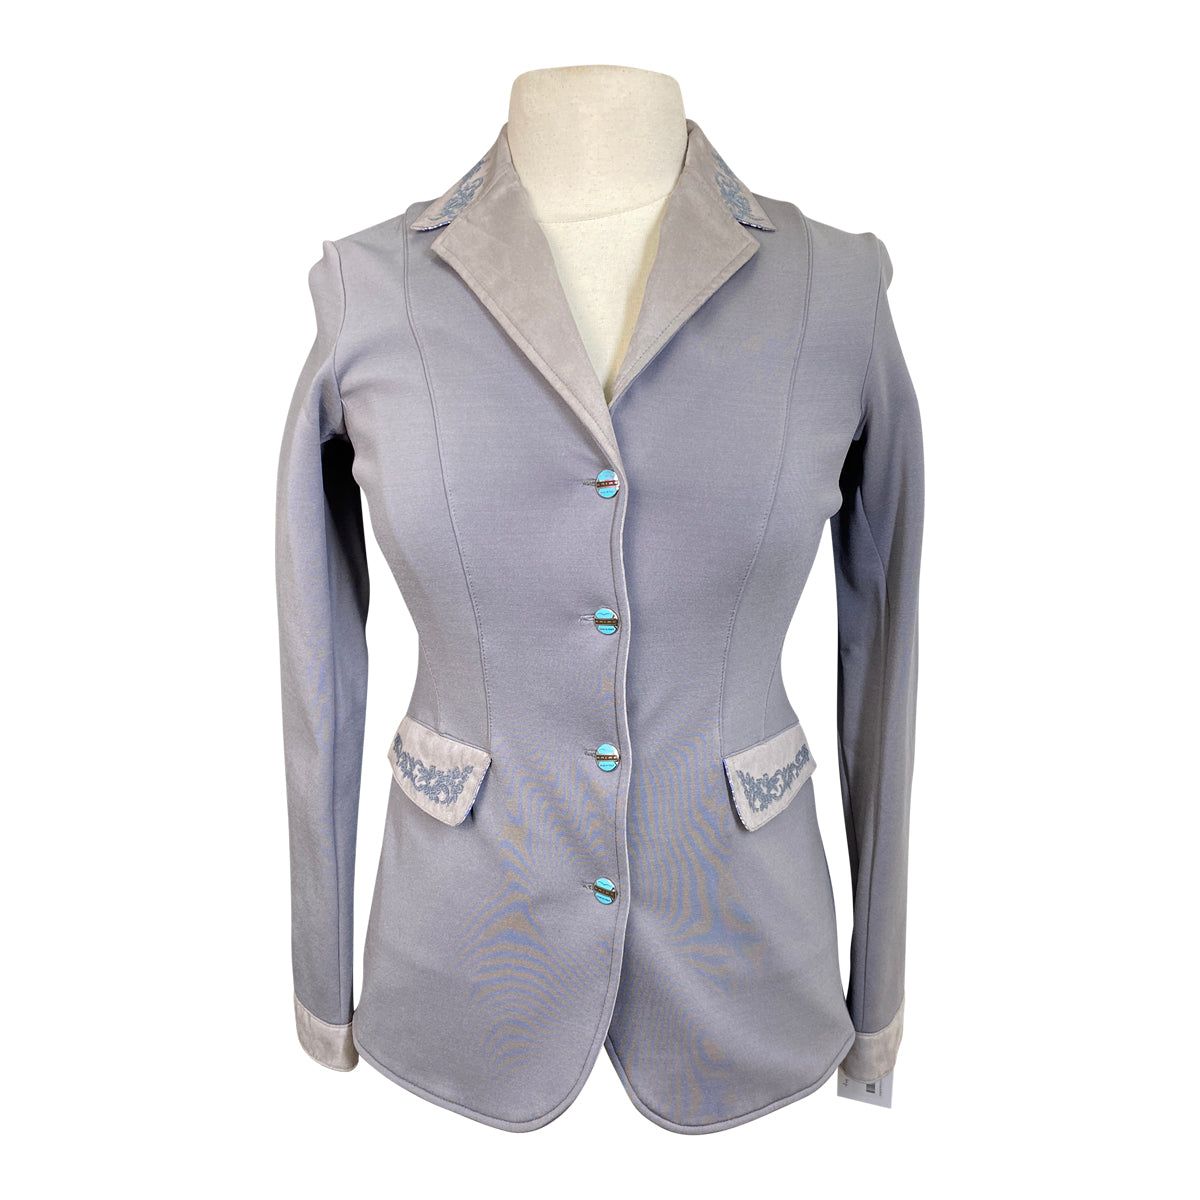 Animo Custom Show Coat in Grey w/Blue Floral